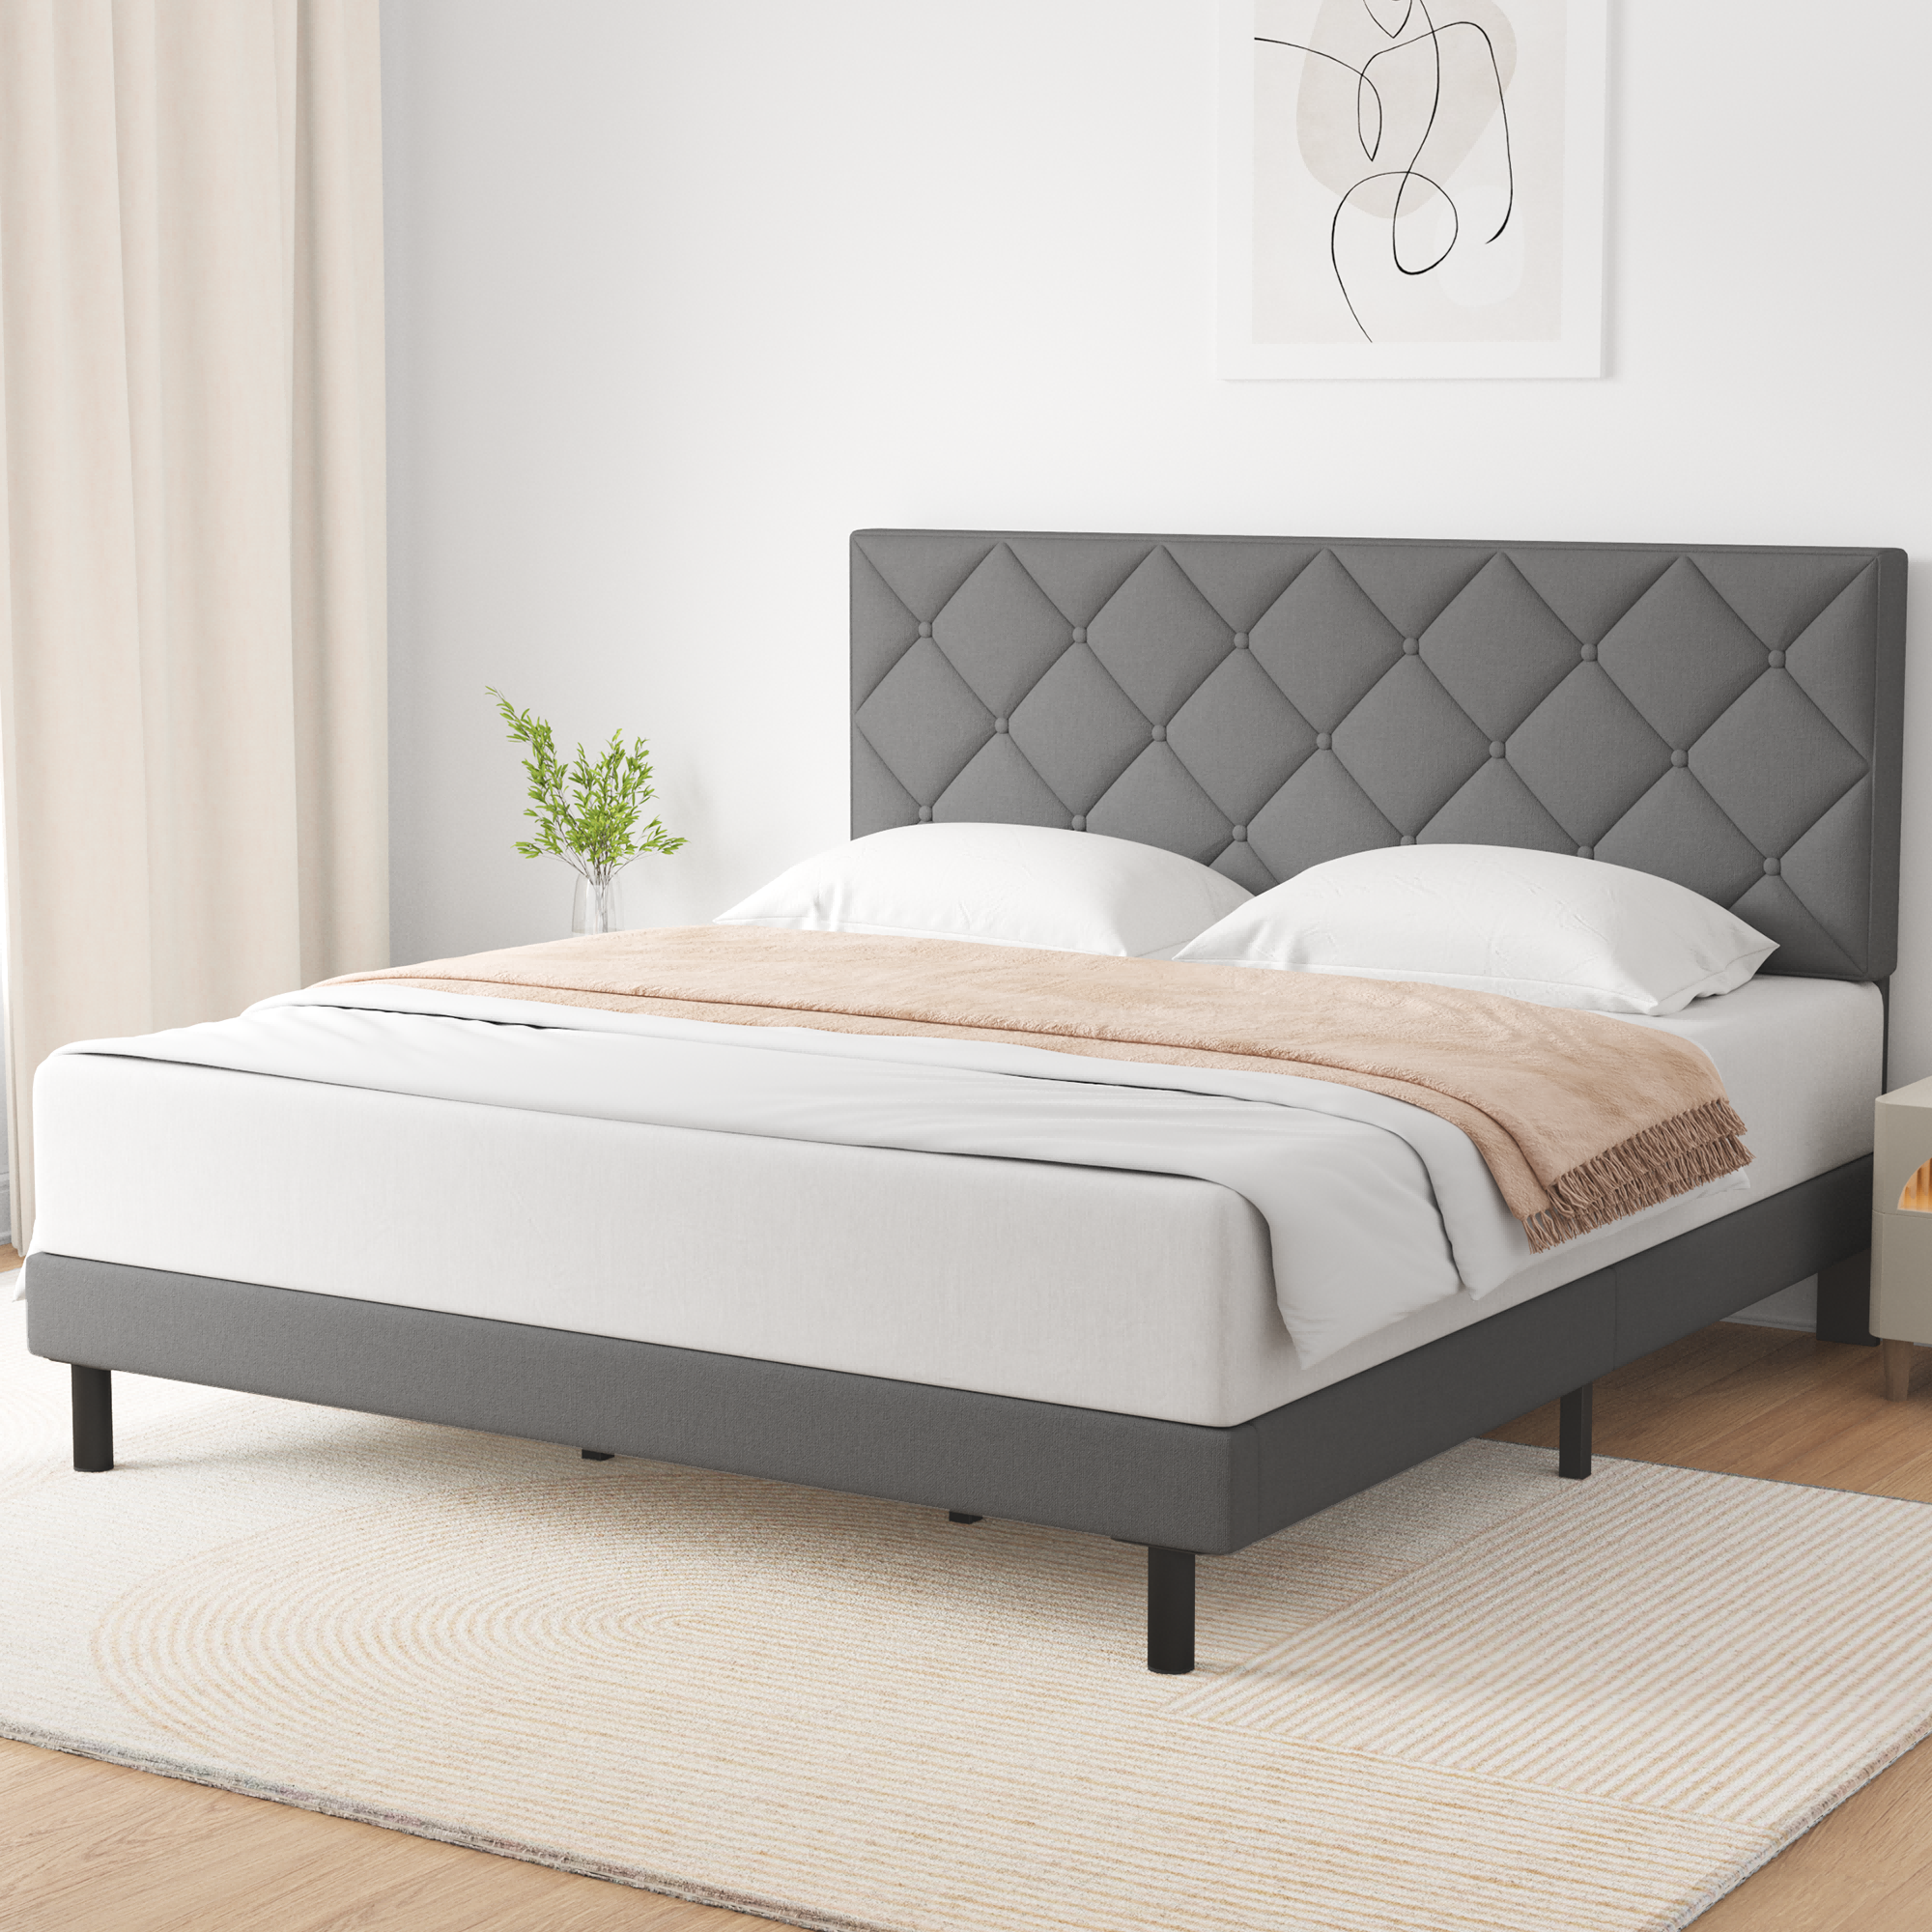 King Bed Frame, HAIIDE King Size bed Frame with Fabric Upholstered Headboard,light Grey, Easy Assembly - image 2 of 7